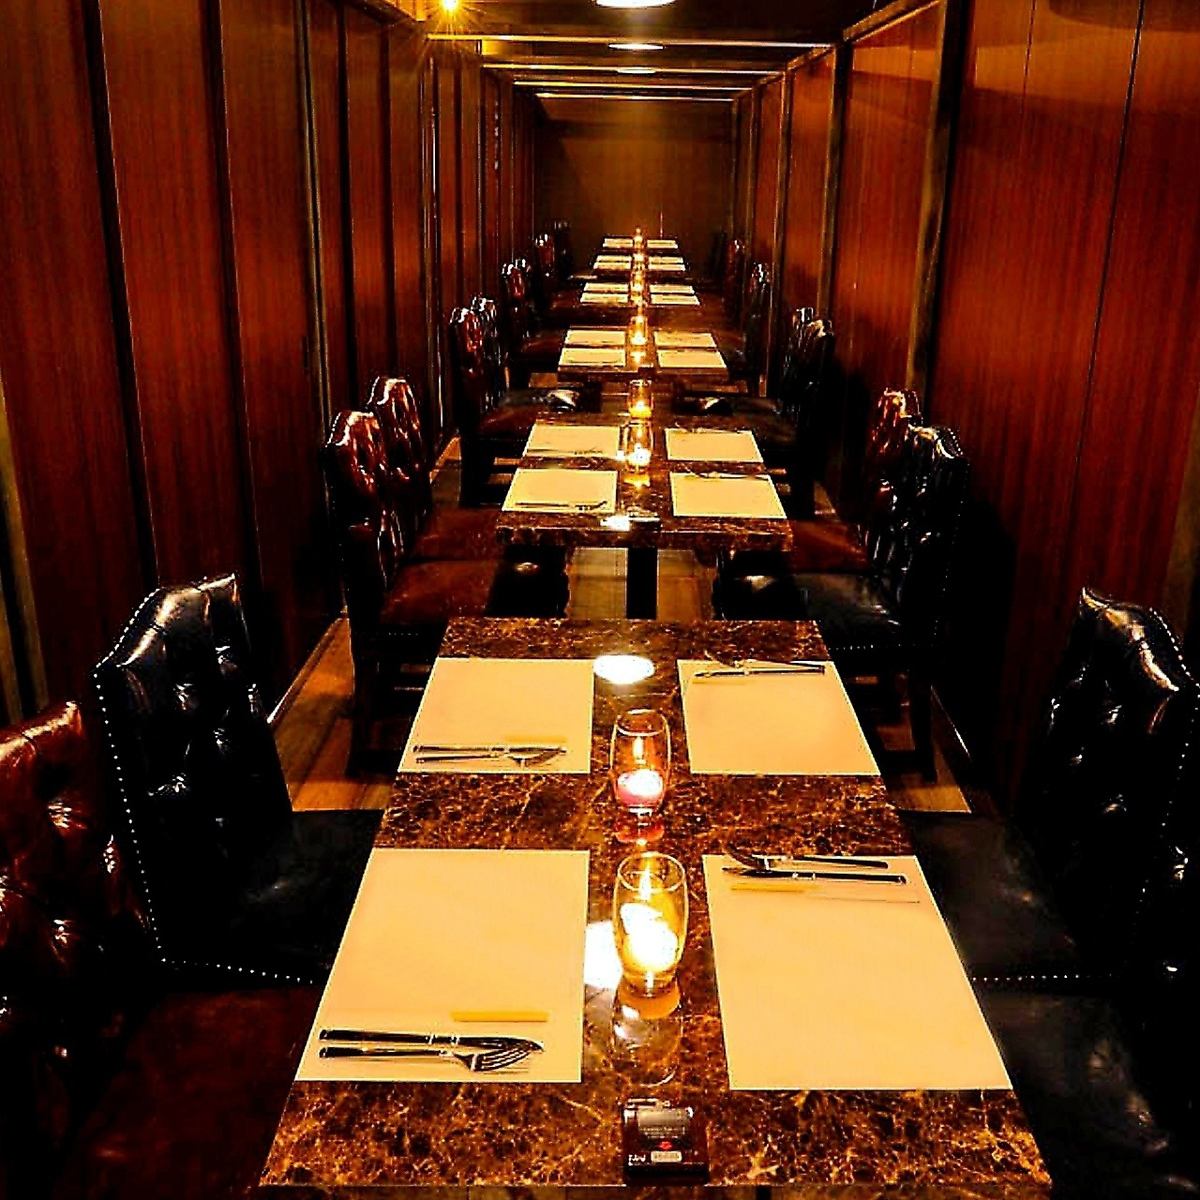 Various banquets can be held in a luxurious atmosphere ◎ 4 minutes walk from the station ☆